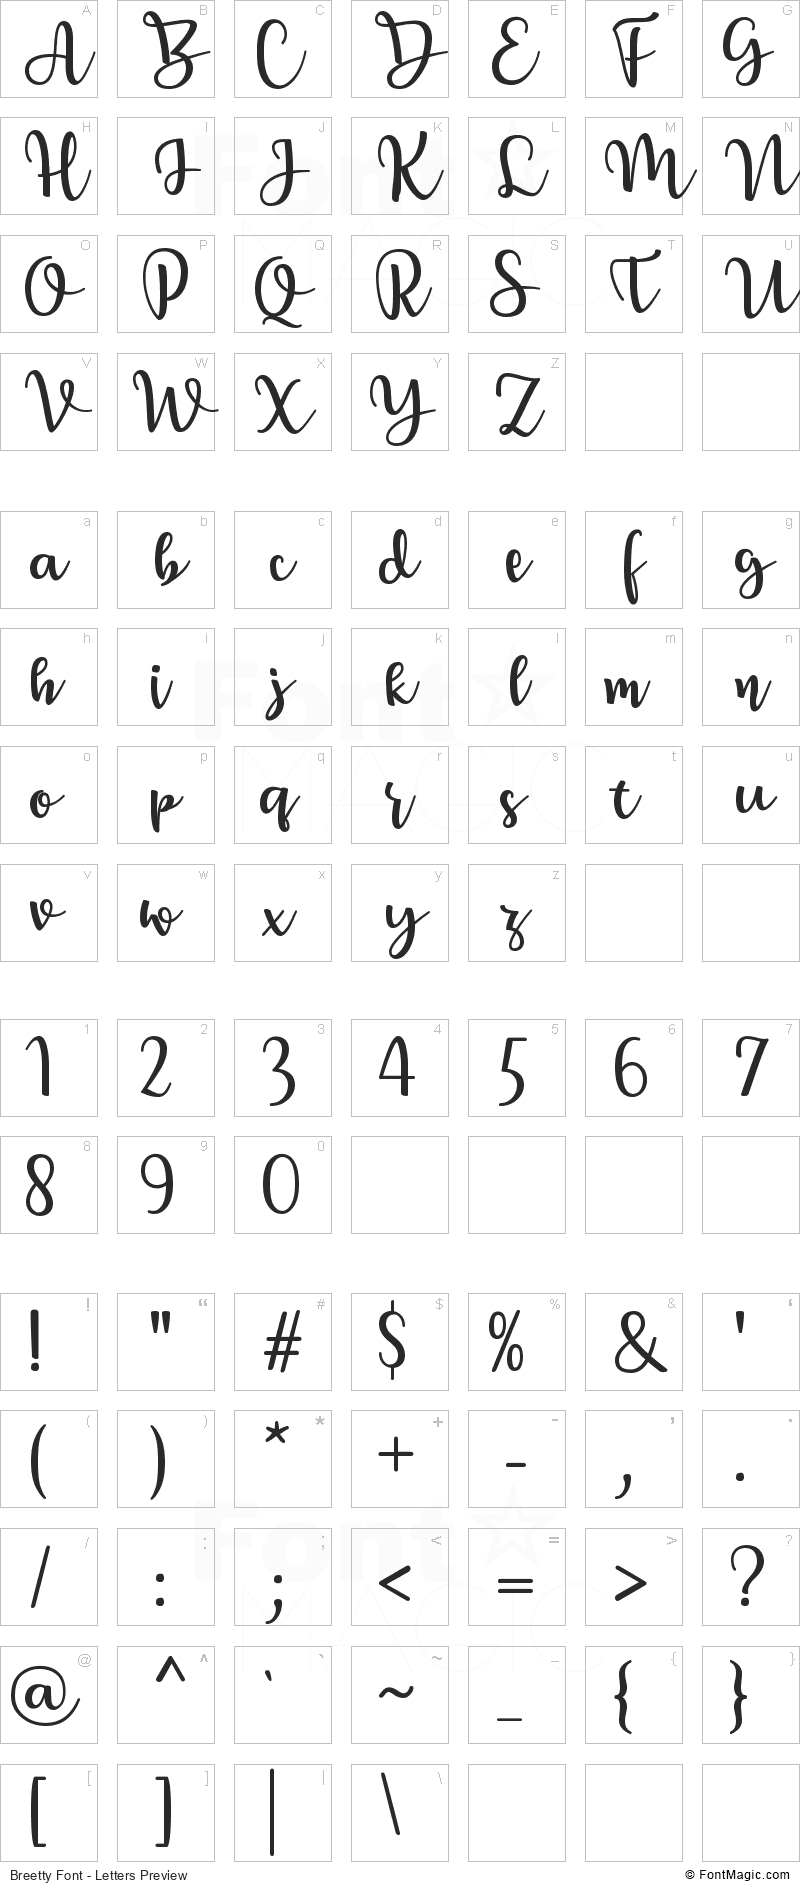 Breetty Font - All Latters Preview Chart